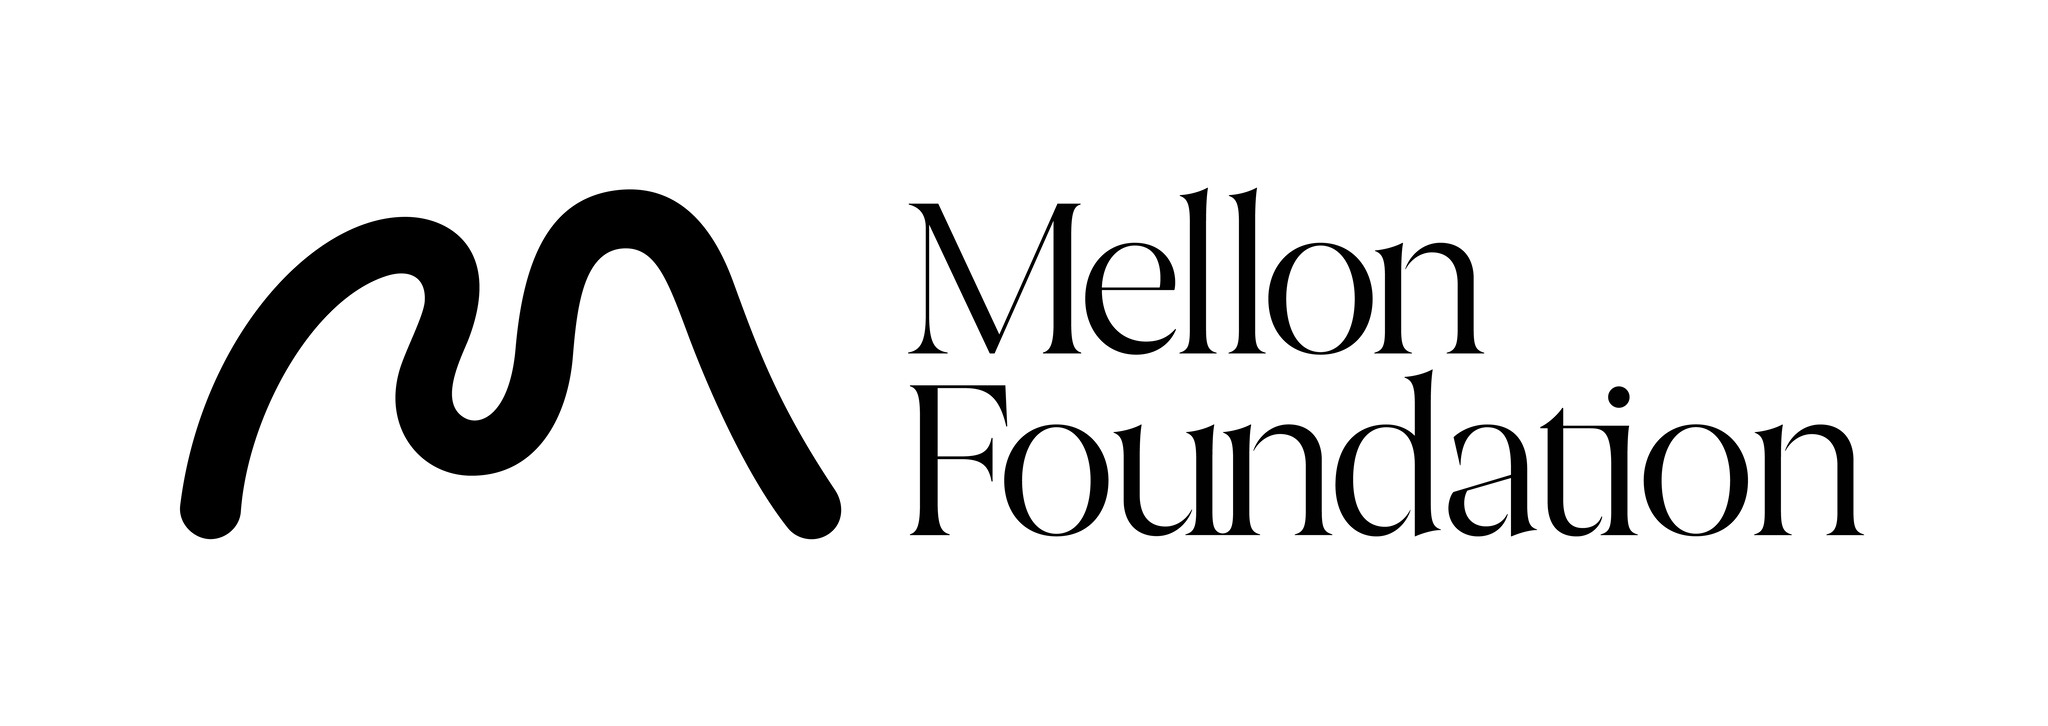 Mellon Foundation logo, including the organization's name beside a squiggly stylized M.